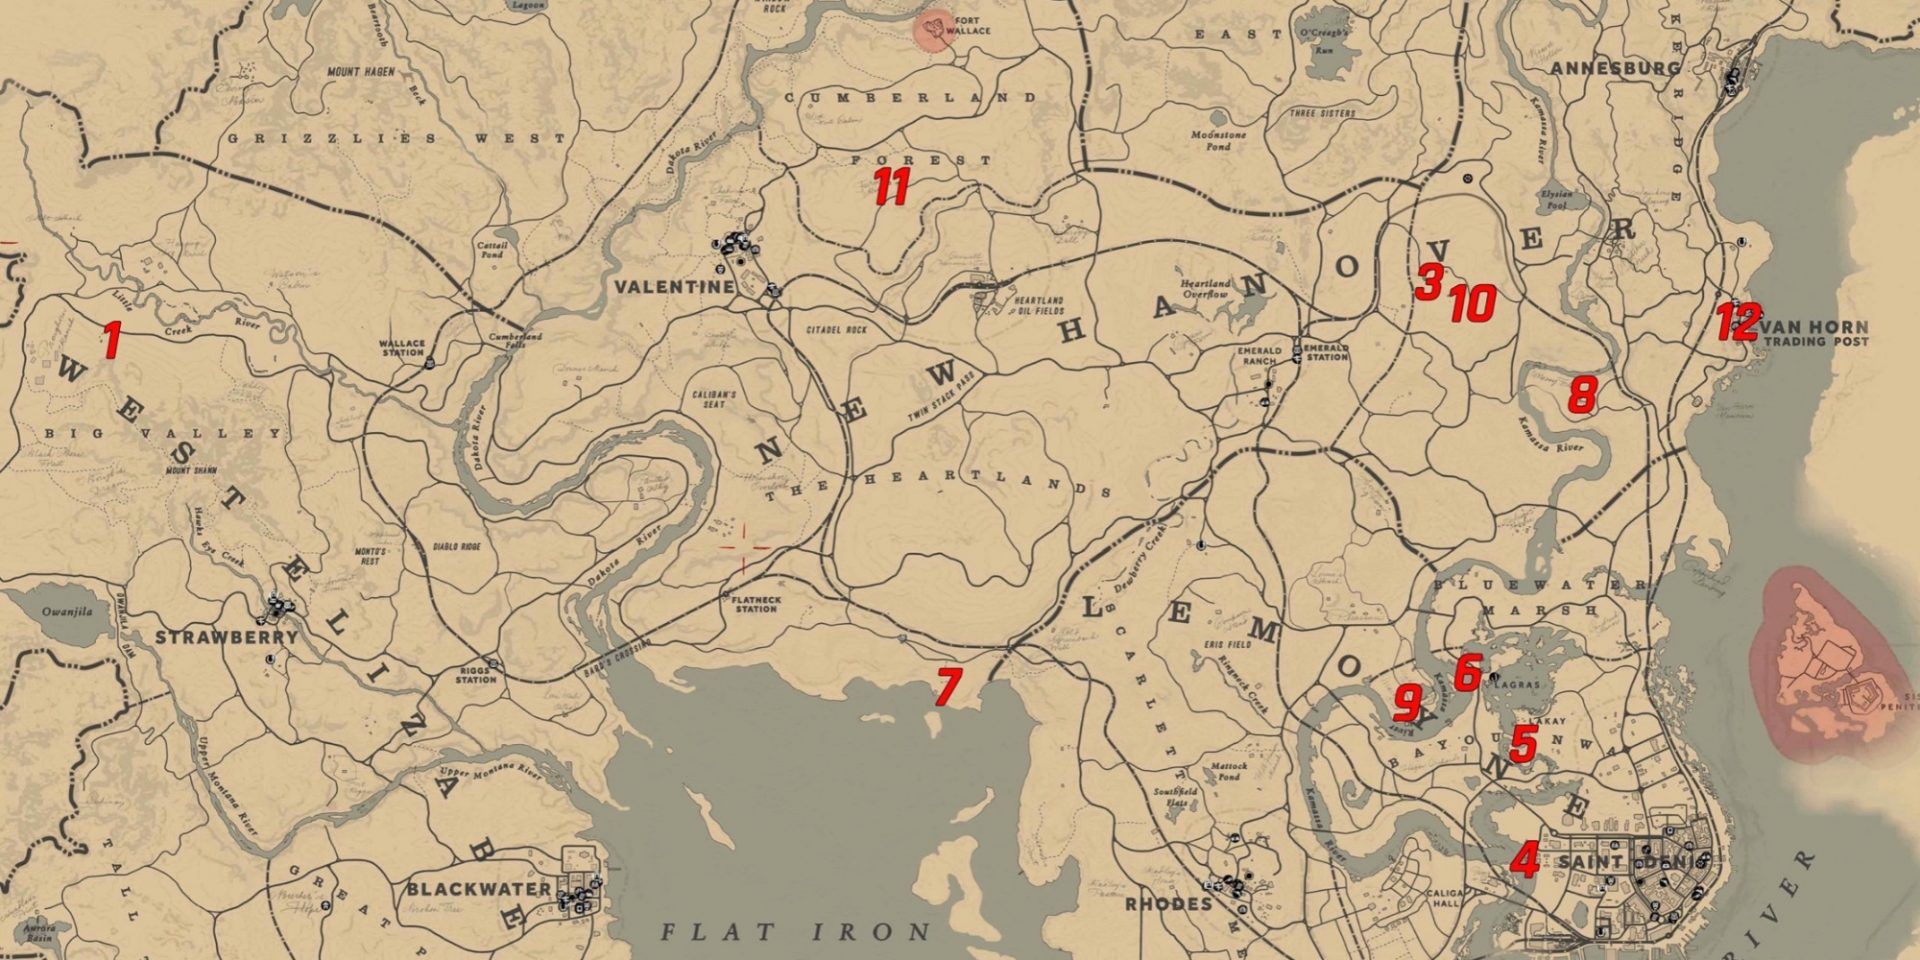 Fauna map and locations